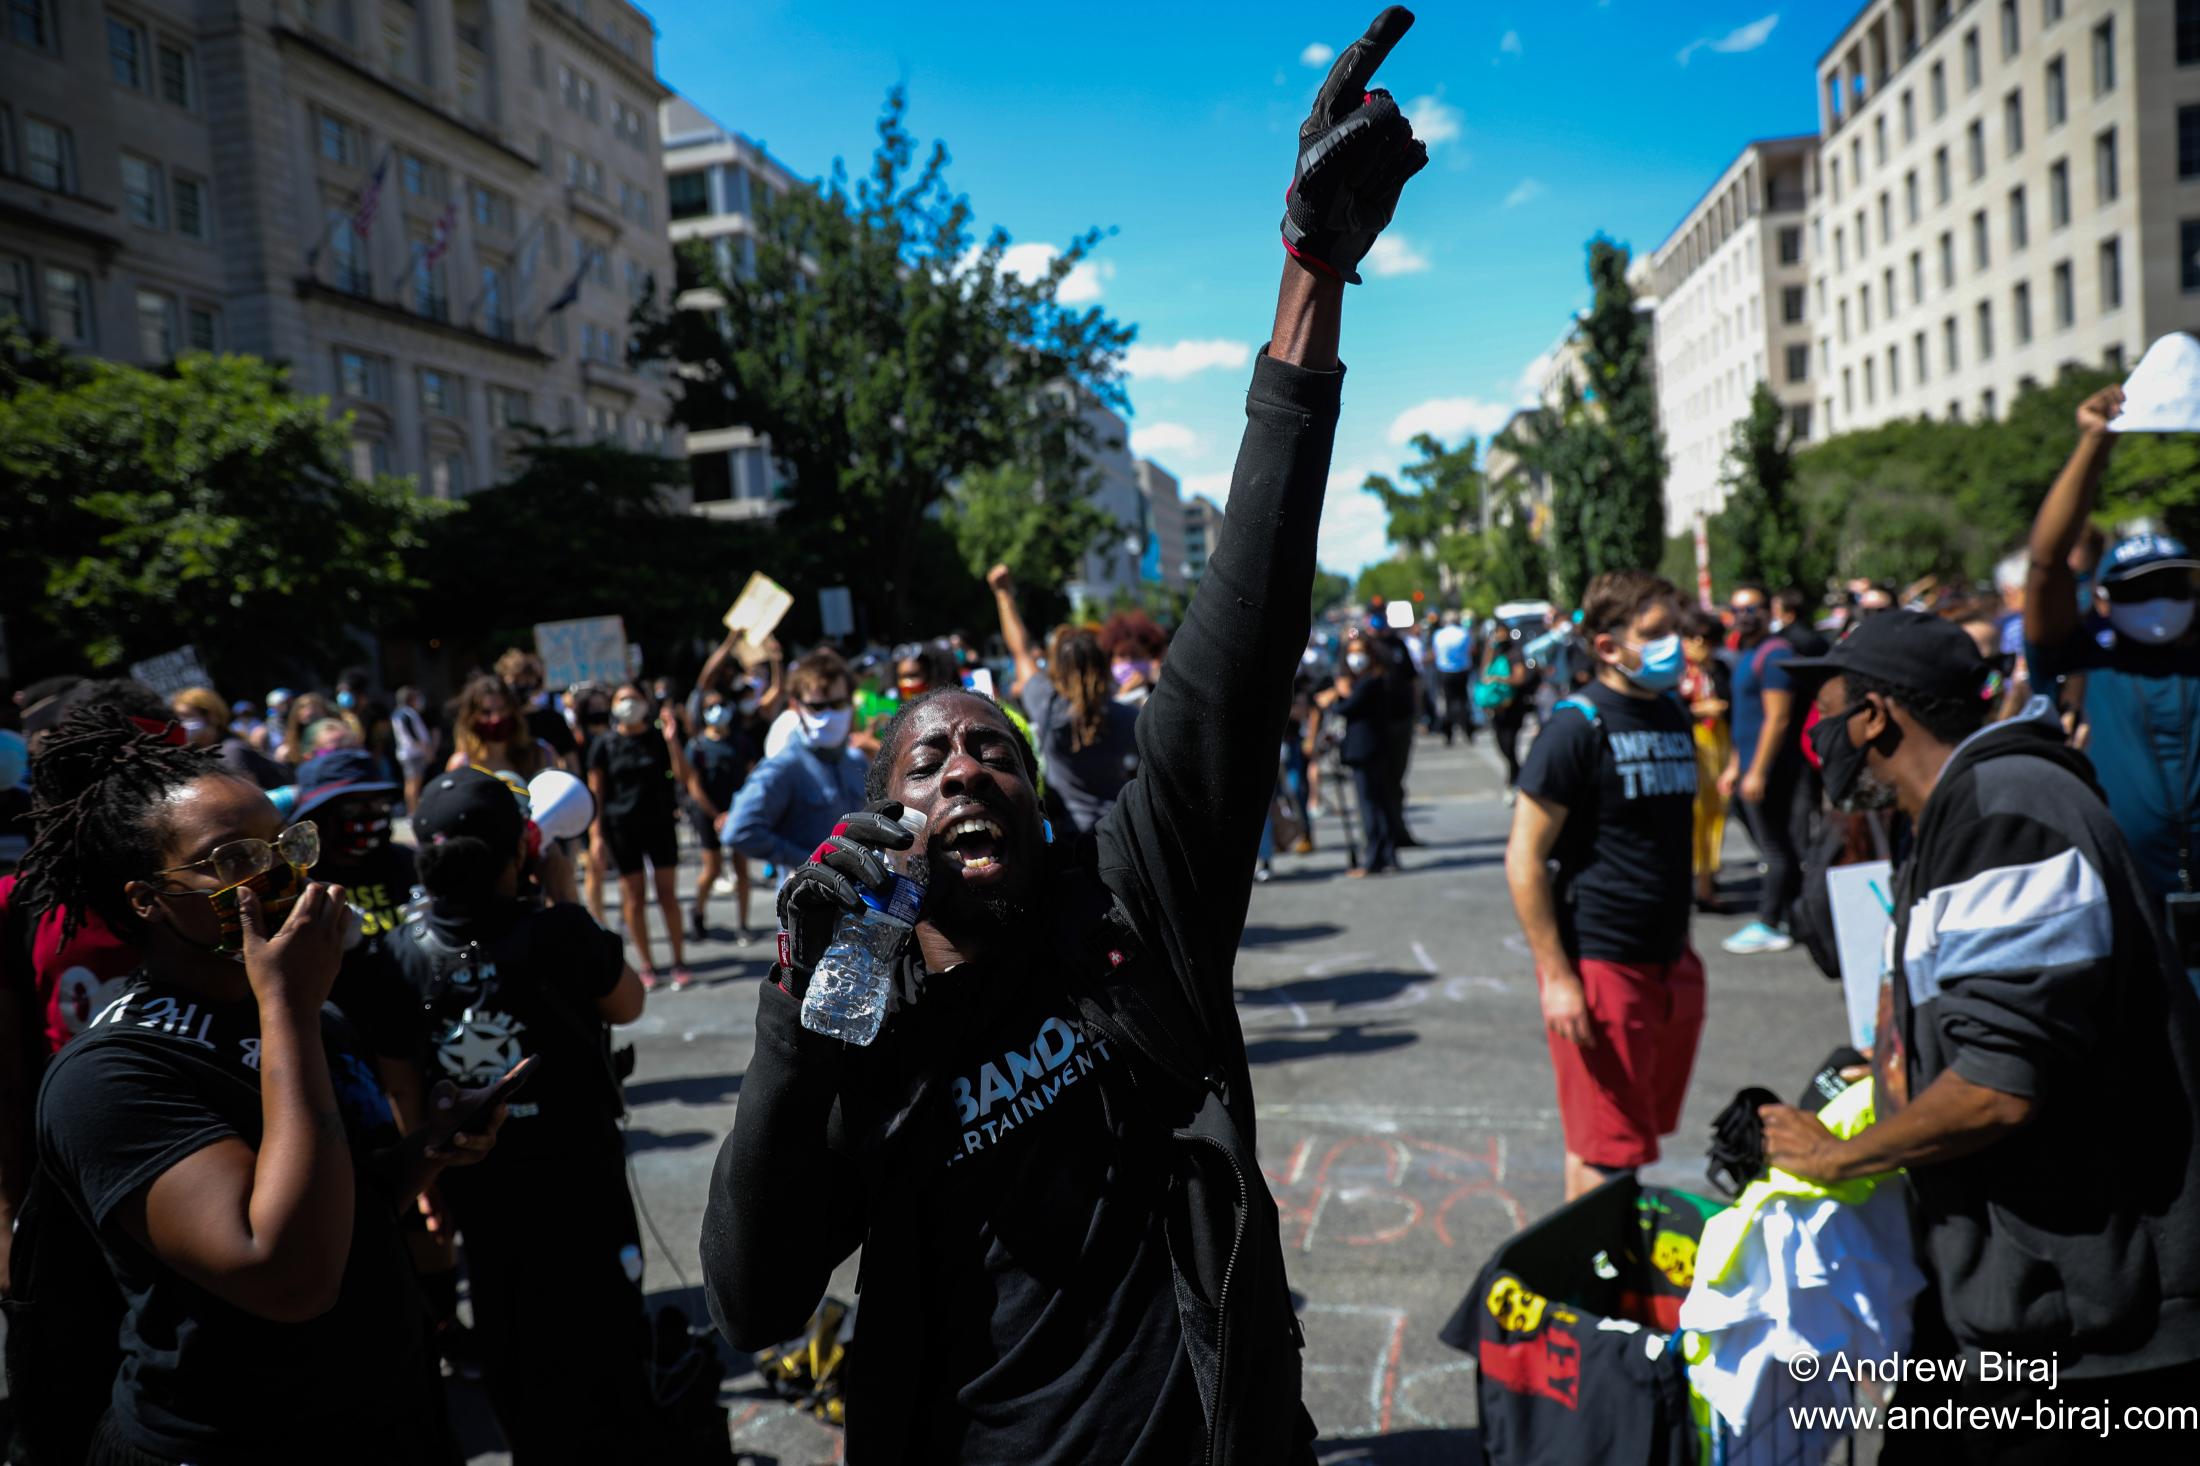 Demonstrators protest peacefully in front of the White House in Washington, D.C., U.S.A. Thousands of people protest against the death in Minneapolis custody of George Floyd, in Washington on June 1, 2020.